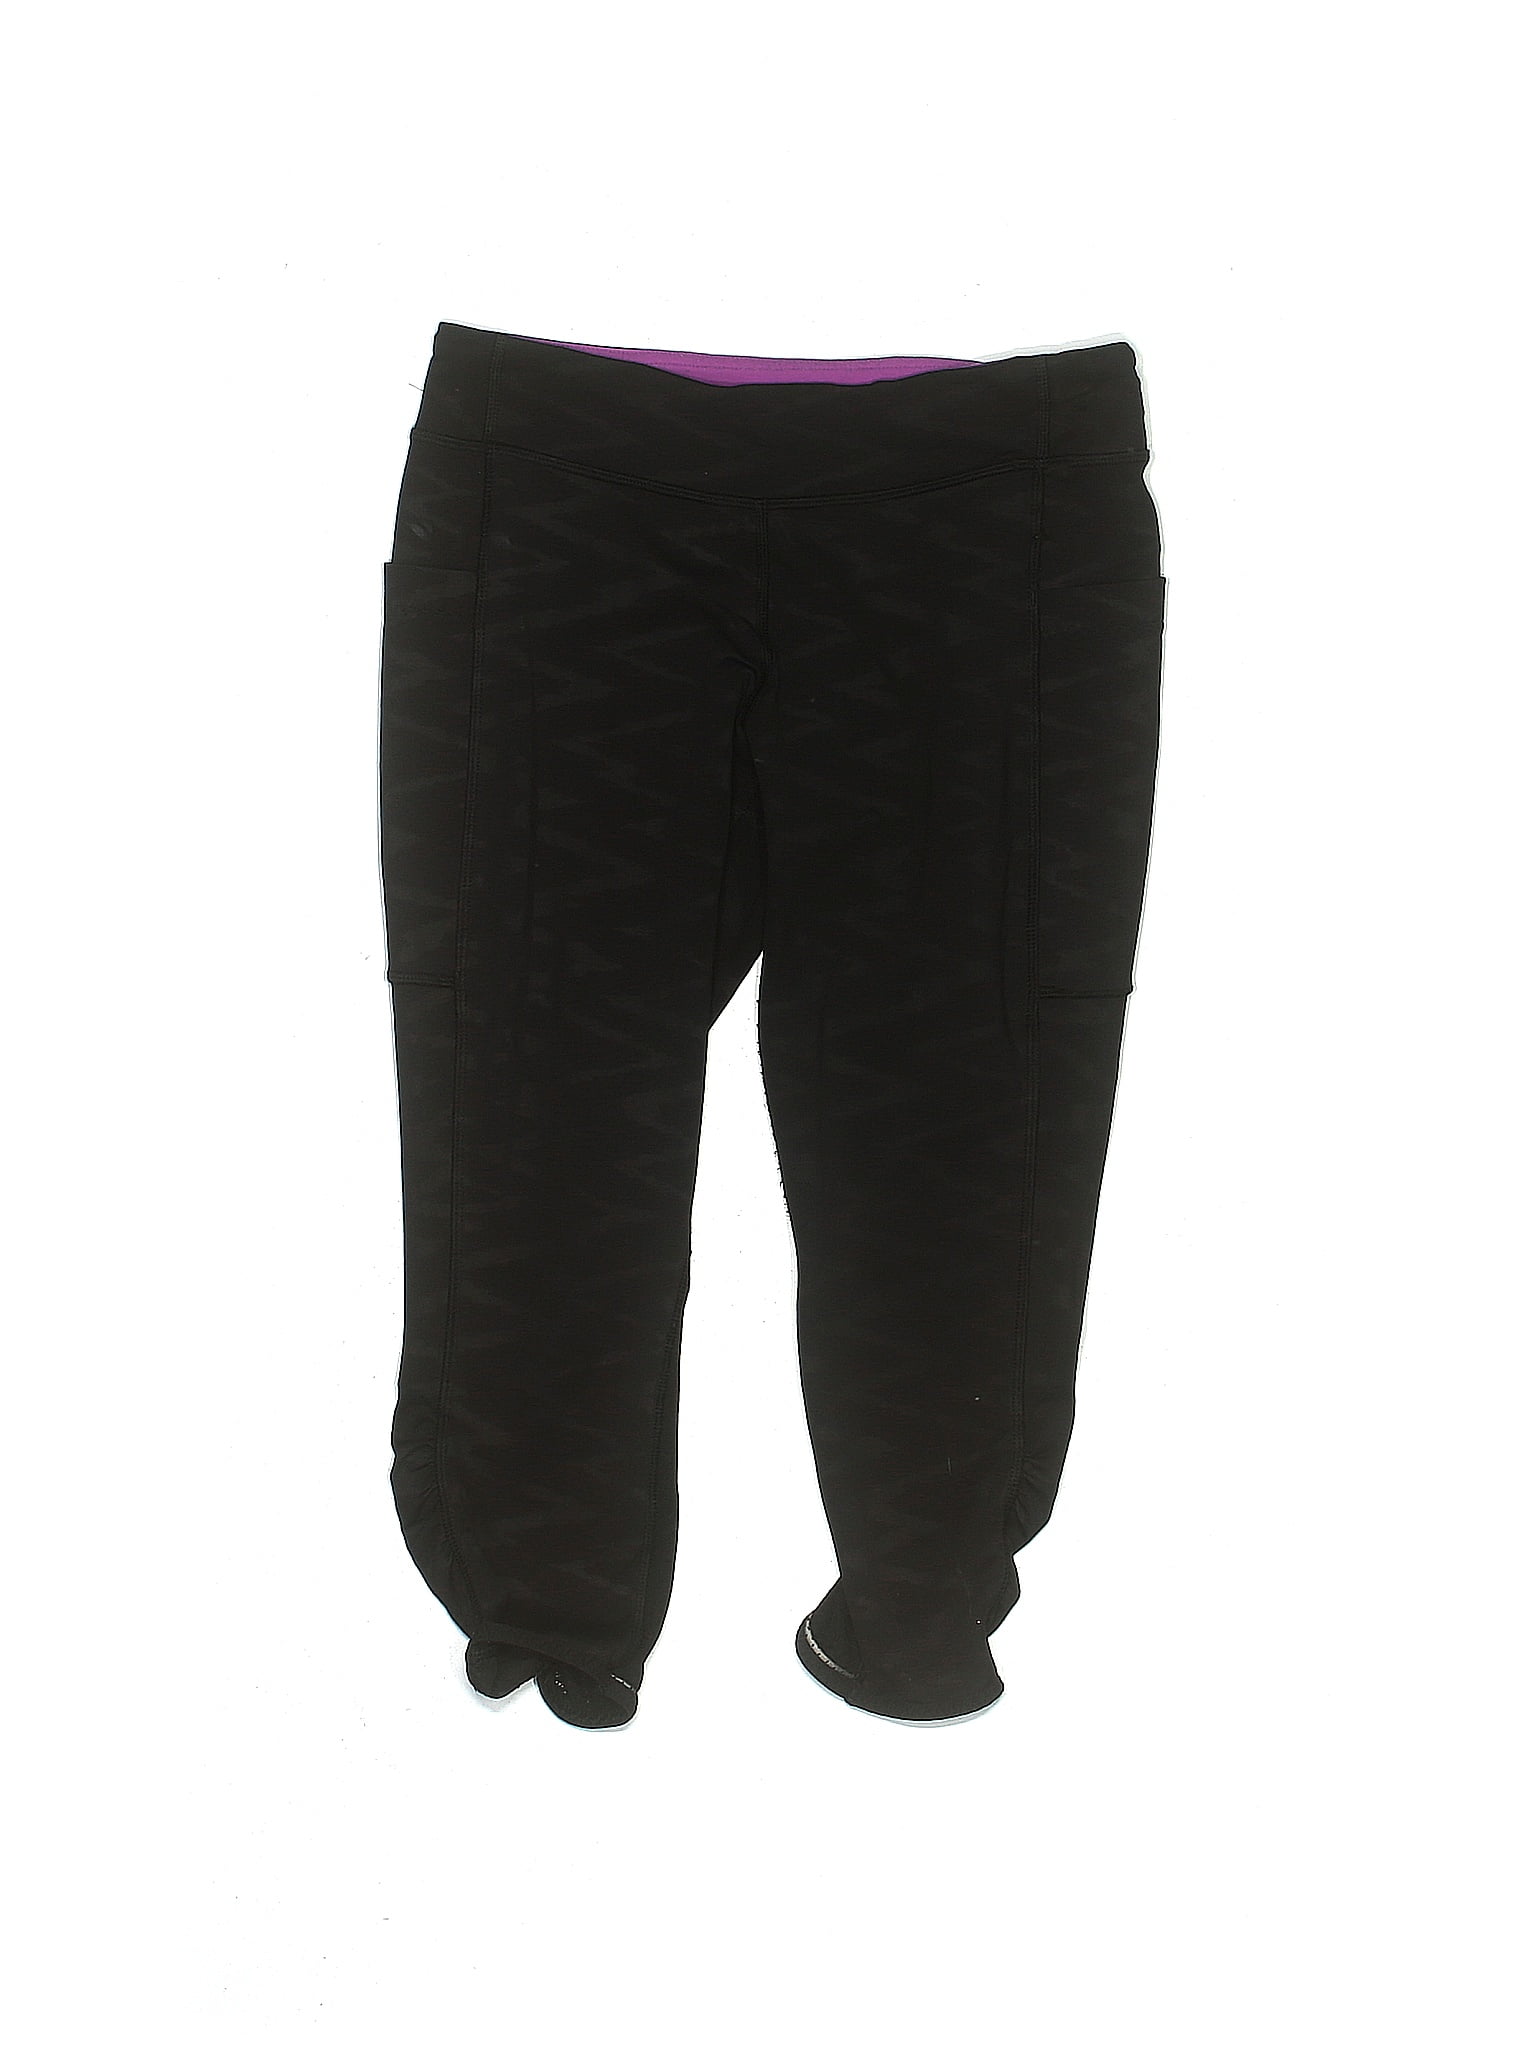 Ivivva Girls' Leggings On Sale Up To 90% Off Retail